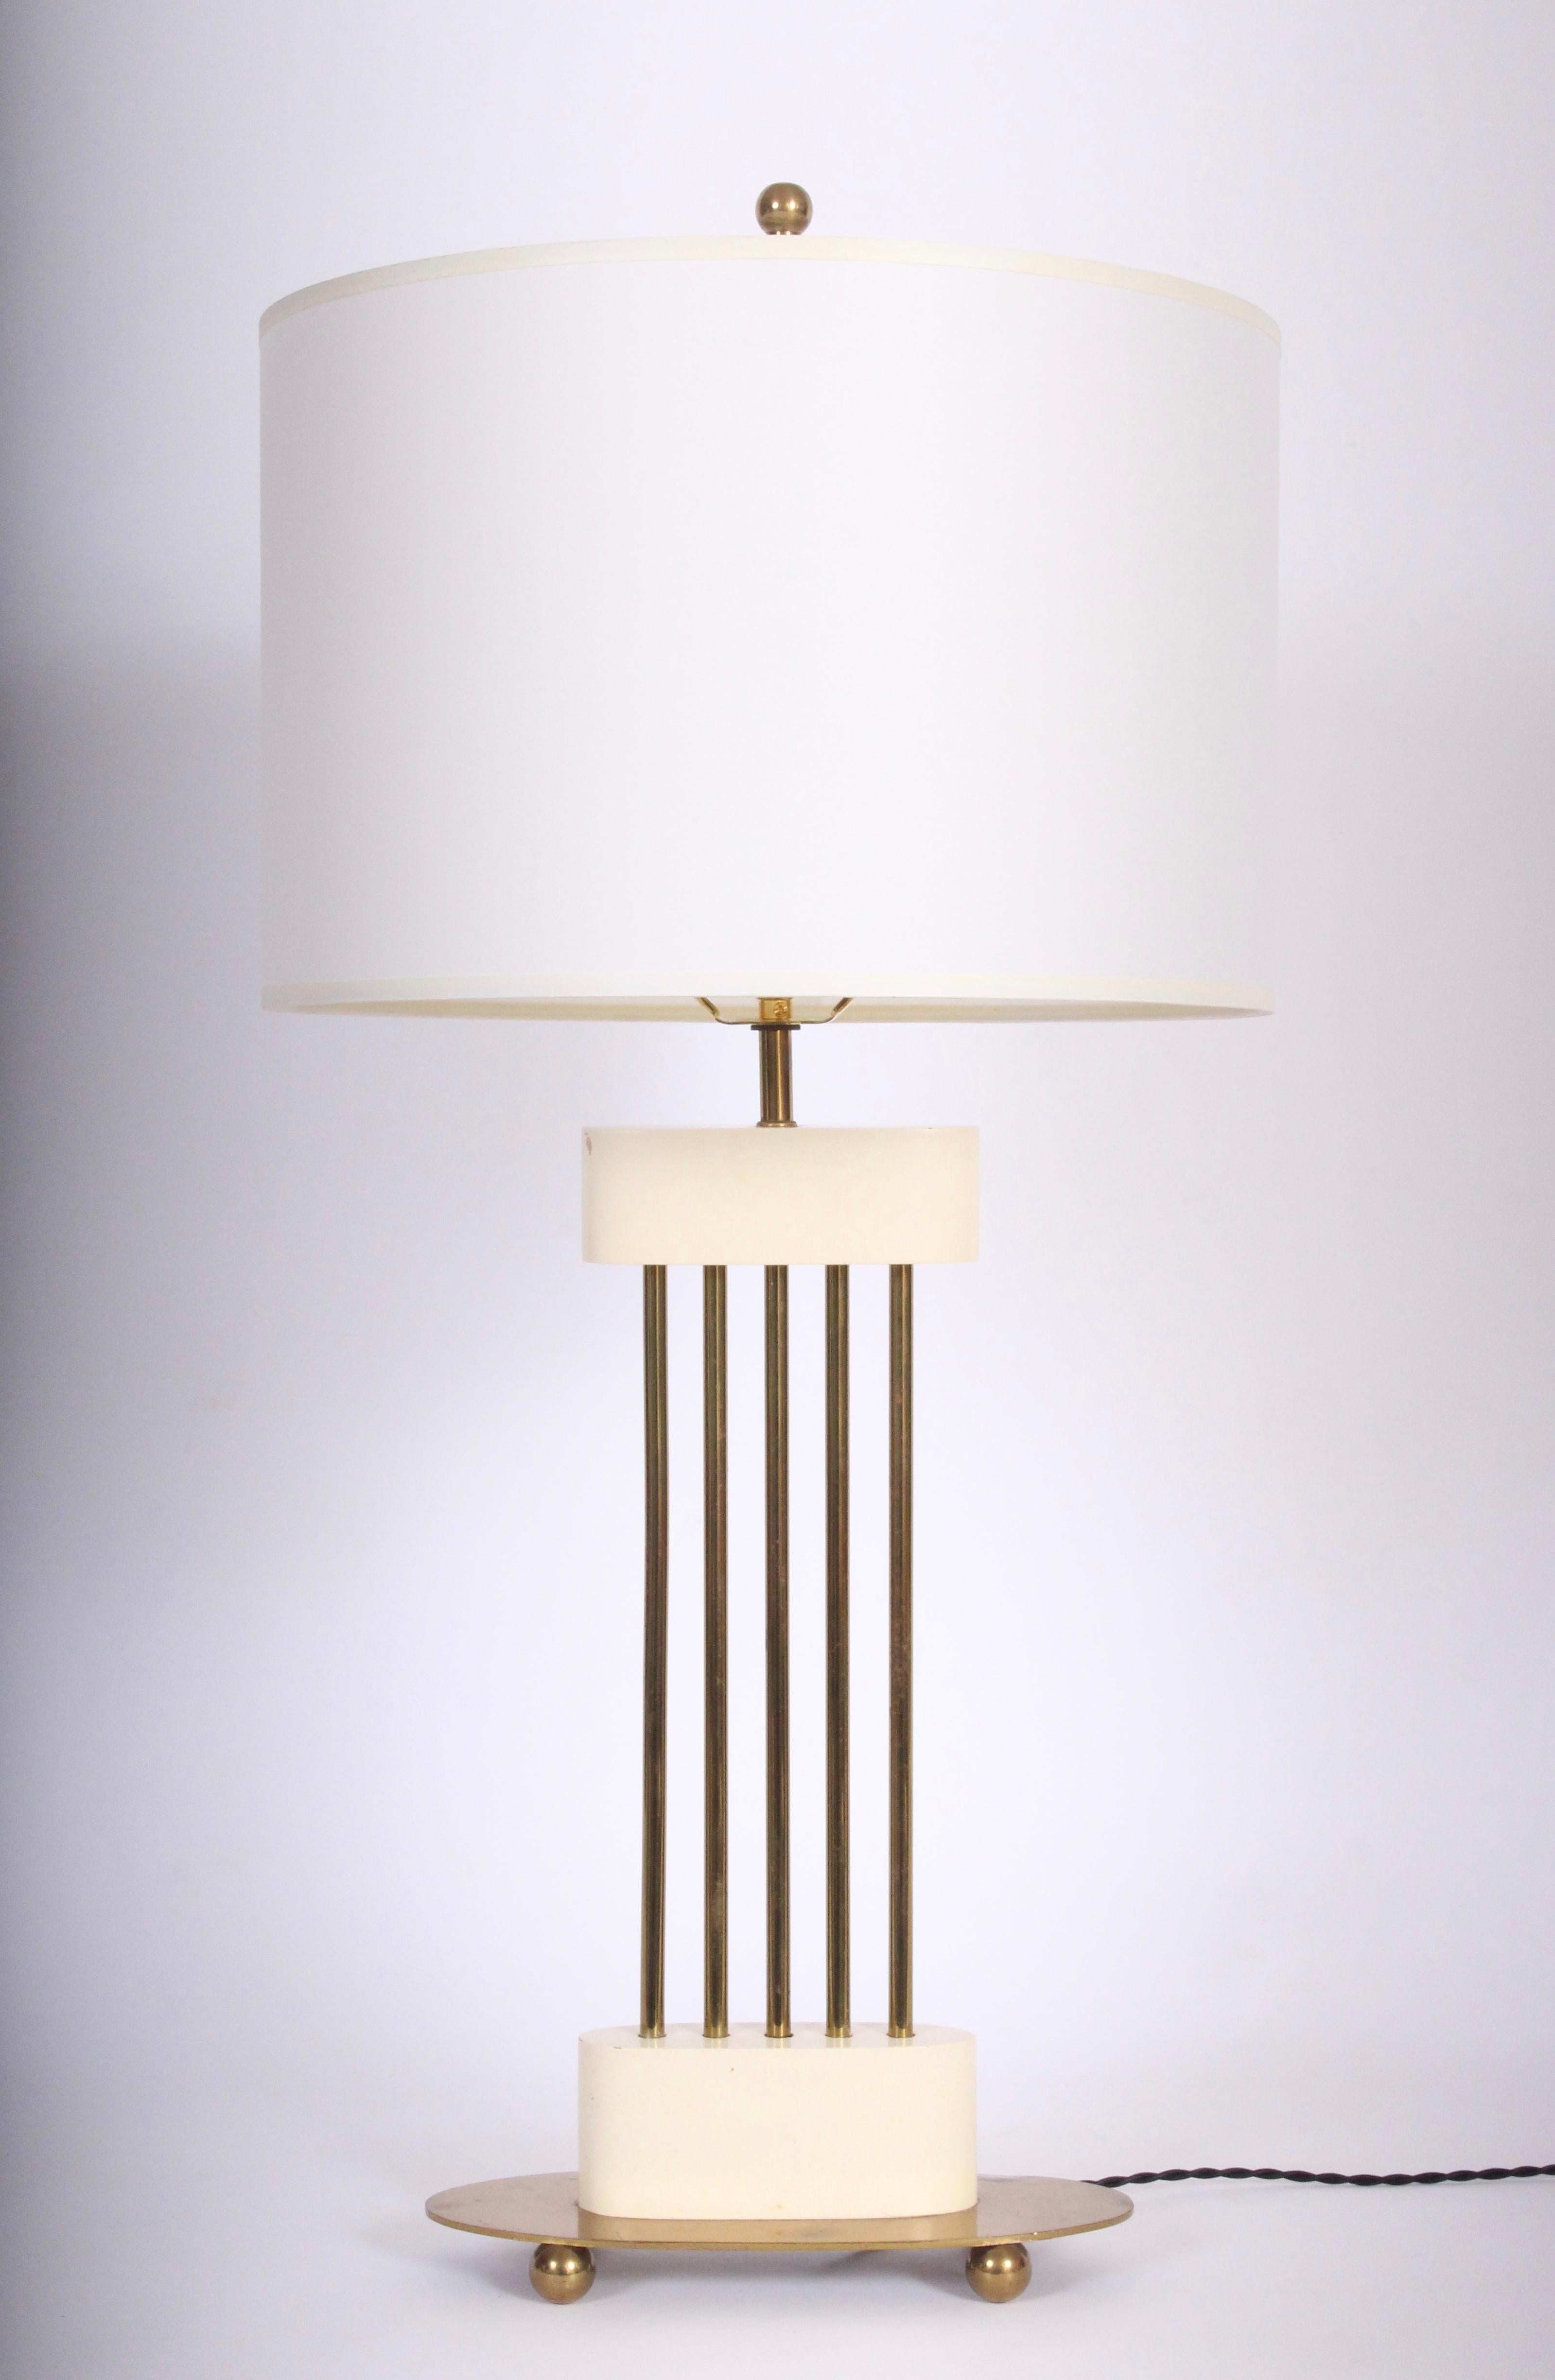 20th Century Parzinger Style Mutual Sunset Cream & Brass Spindle Columns Table Lamp, 1950s For Sale